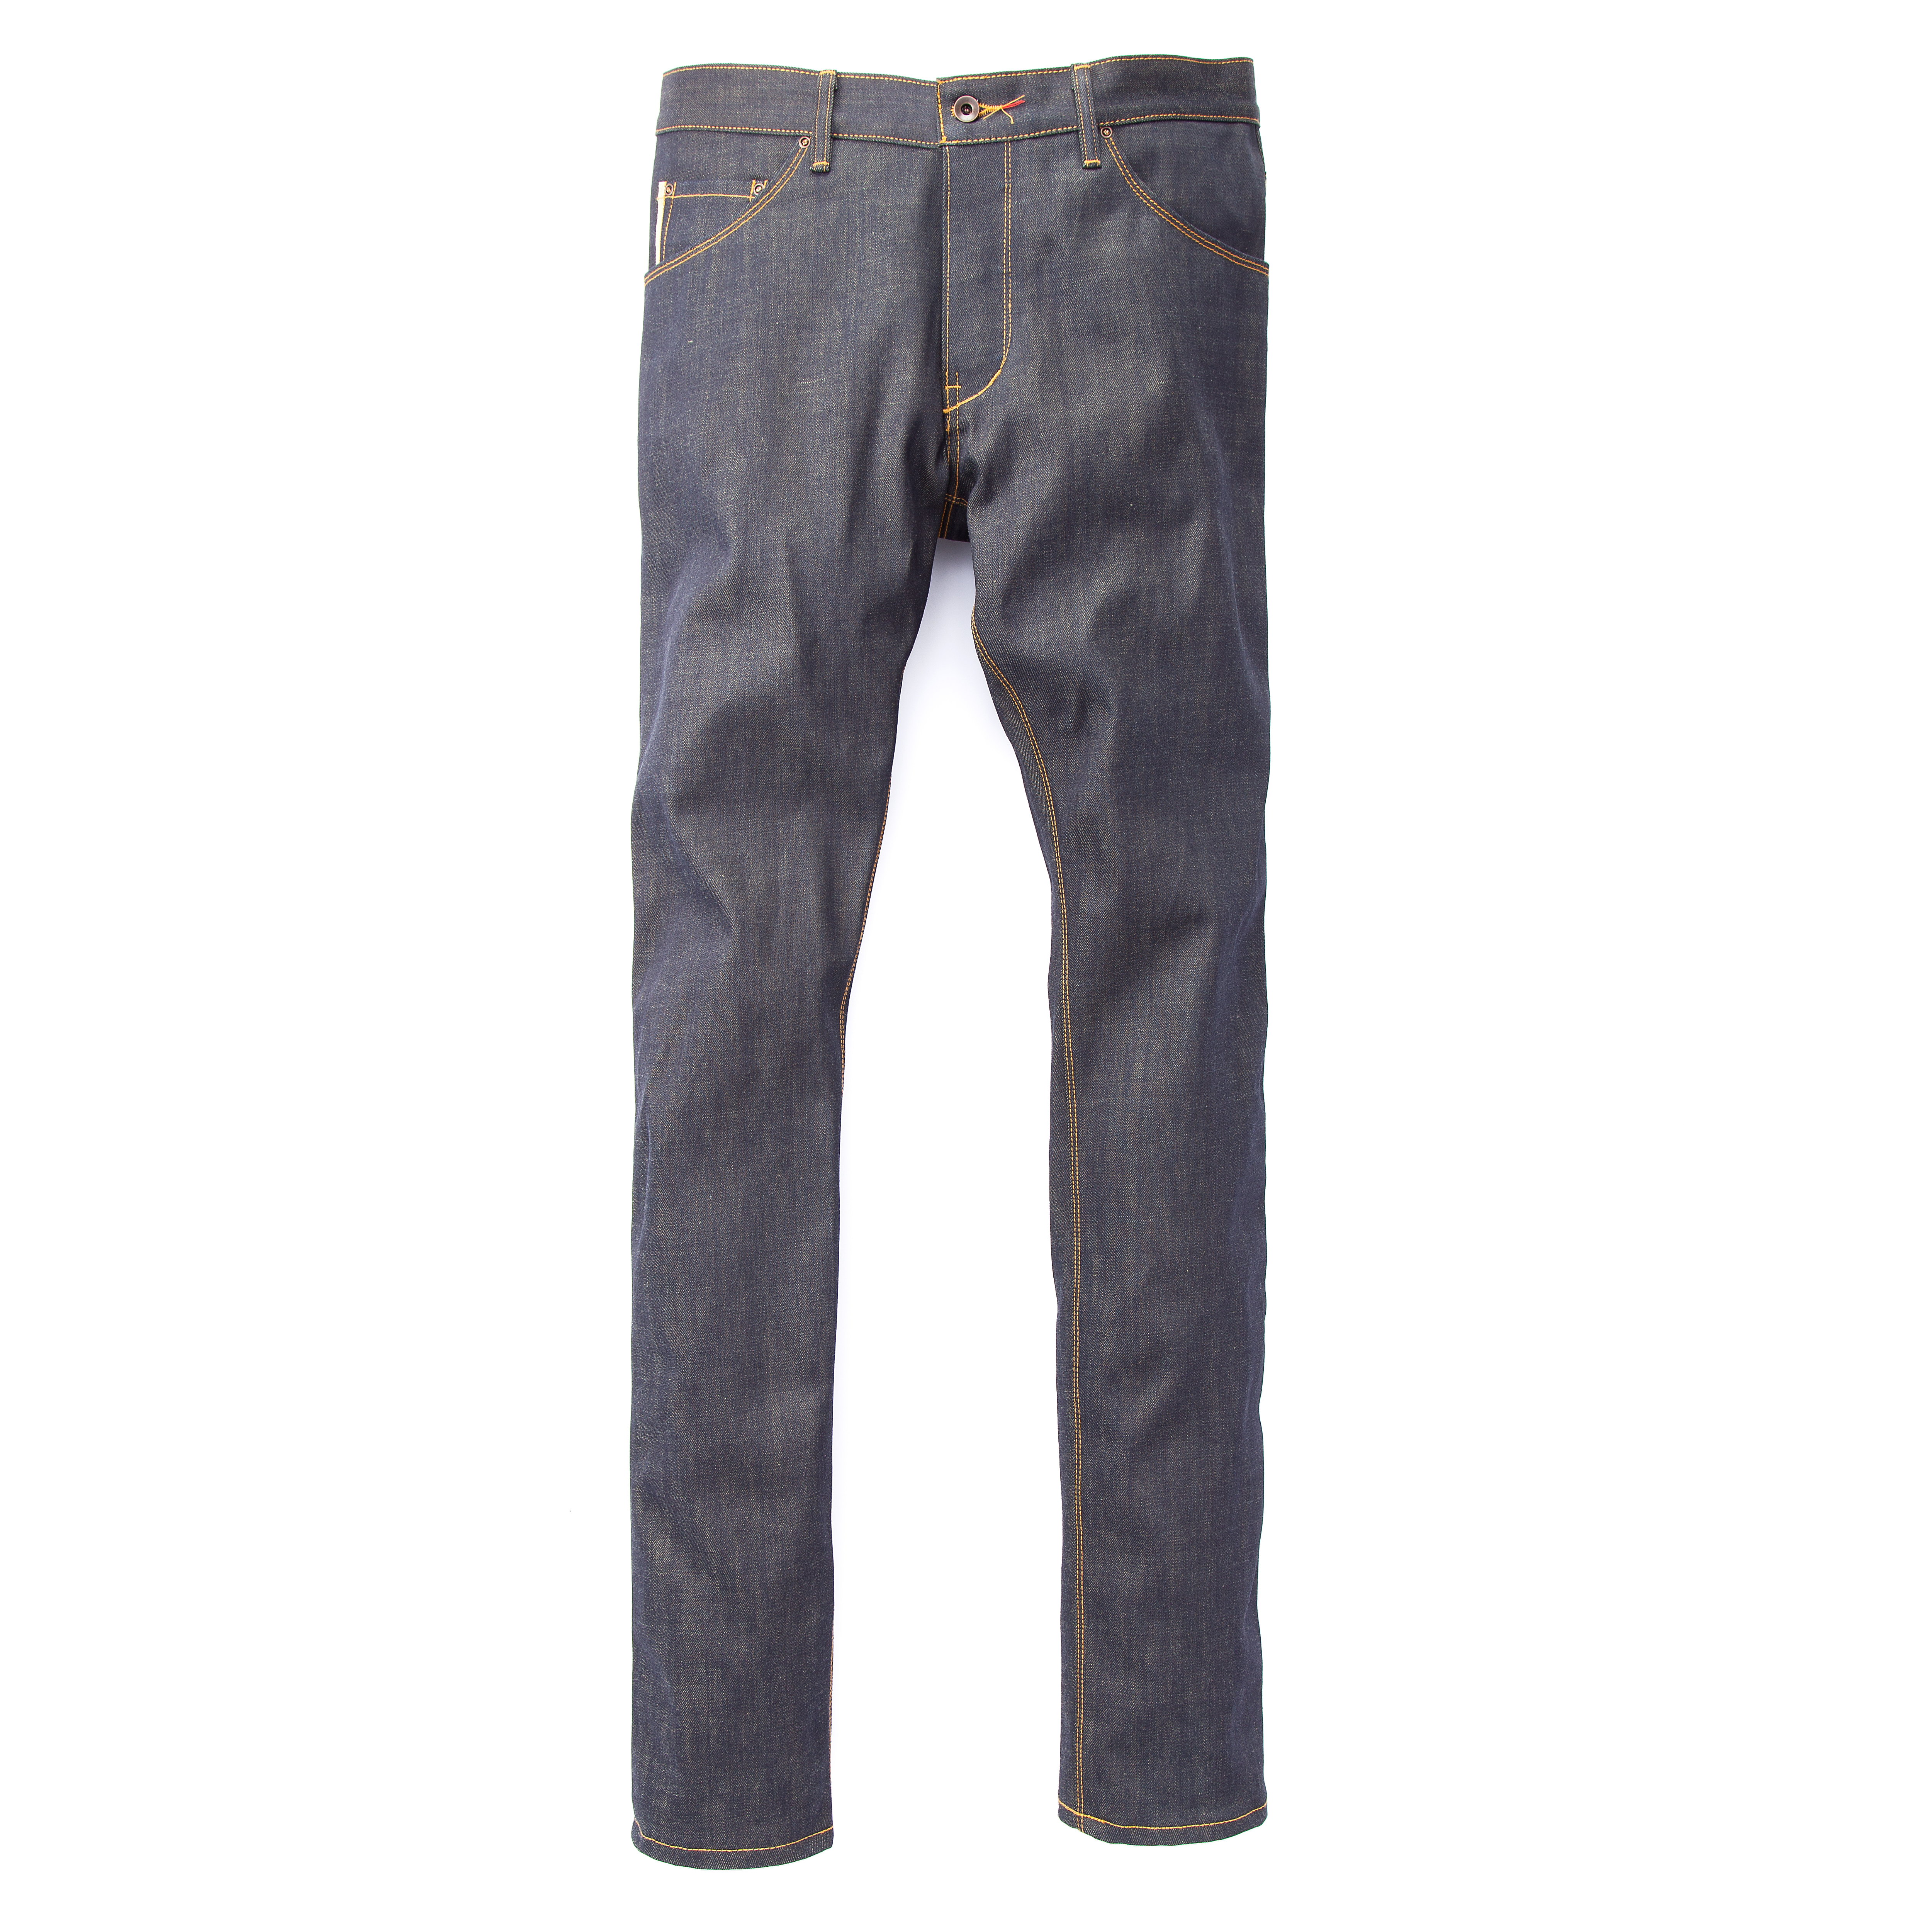 Raleigh Denim: Only 17 pairs - Martin Alloy Raw Selvage | Milled